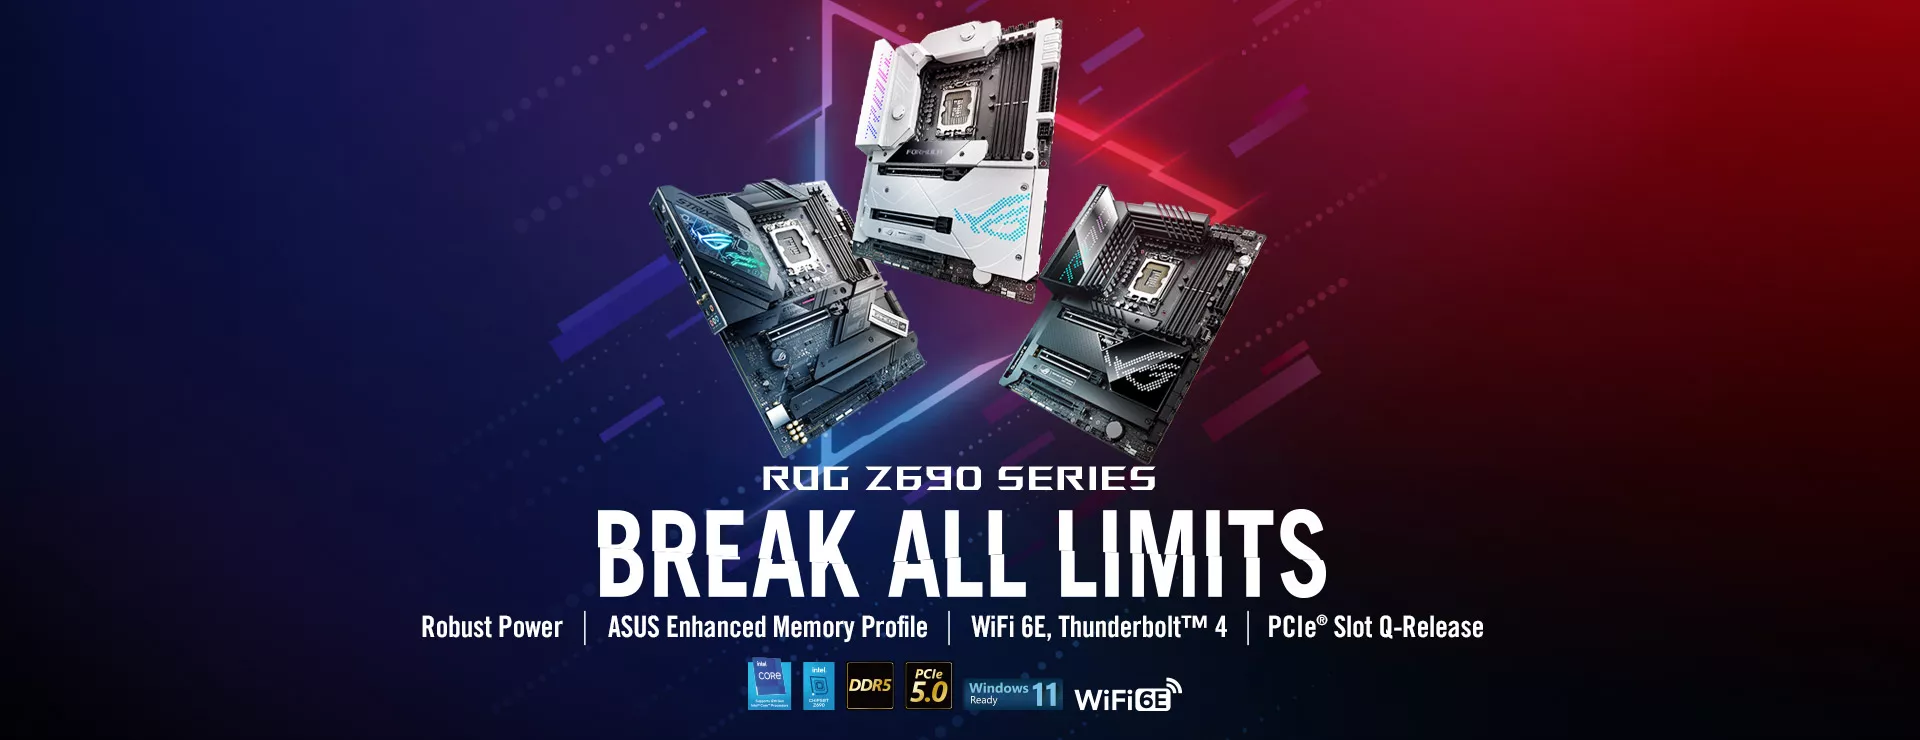 ROG Break All Limits Event Phase 2